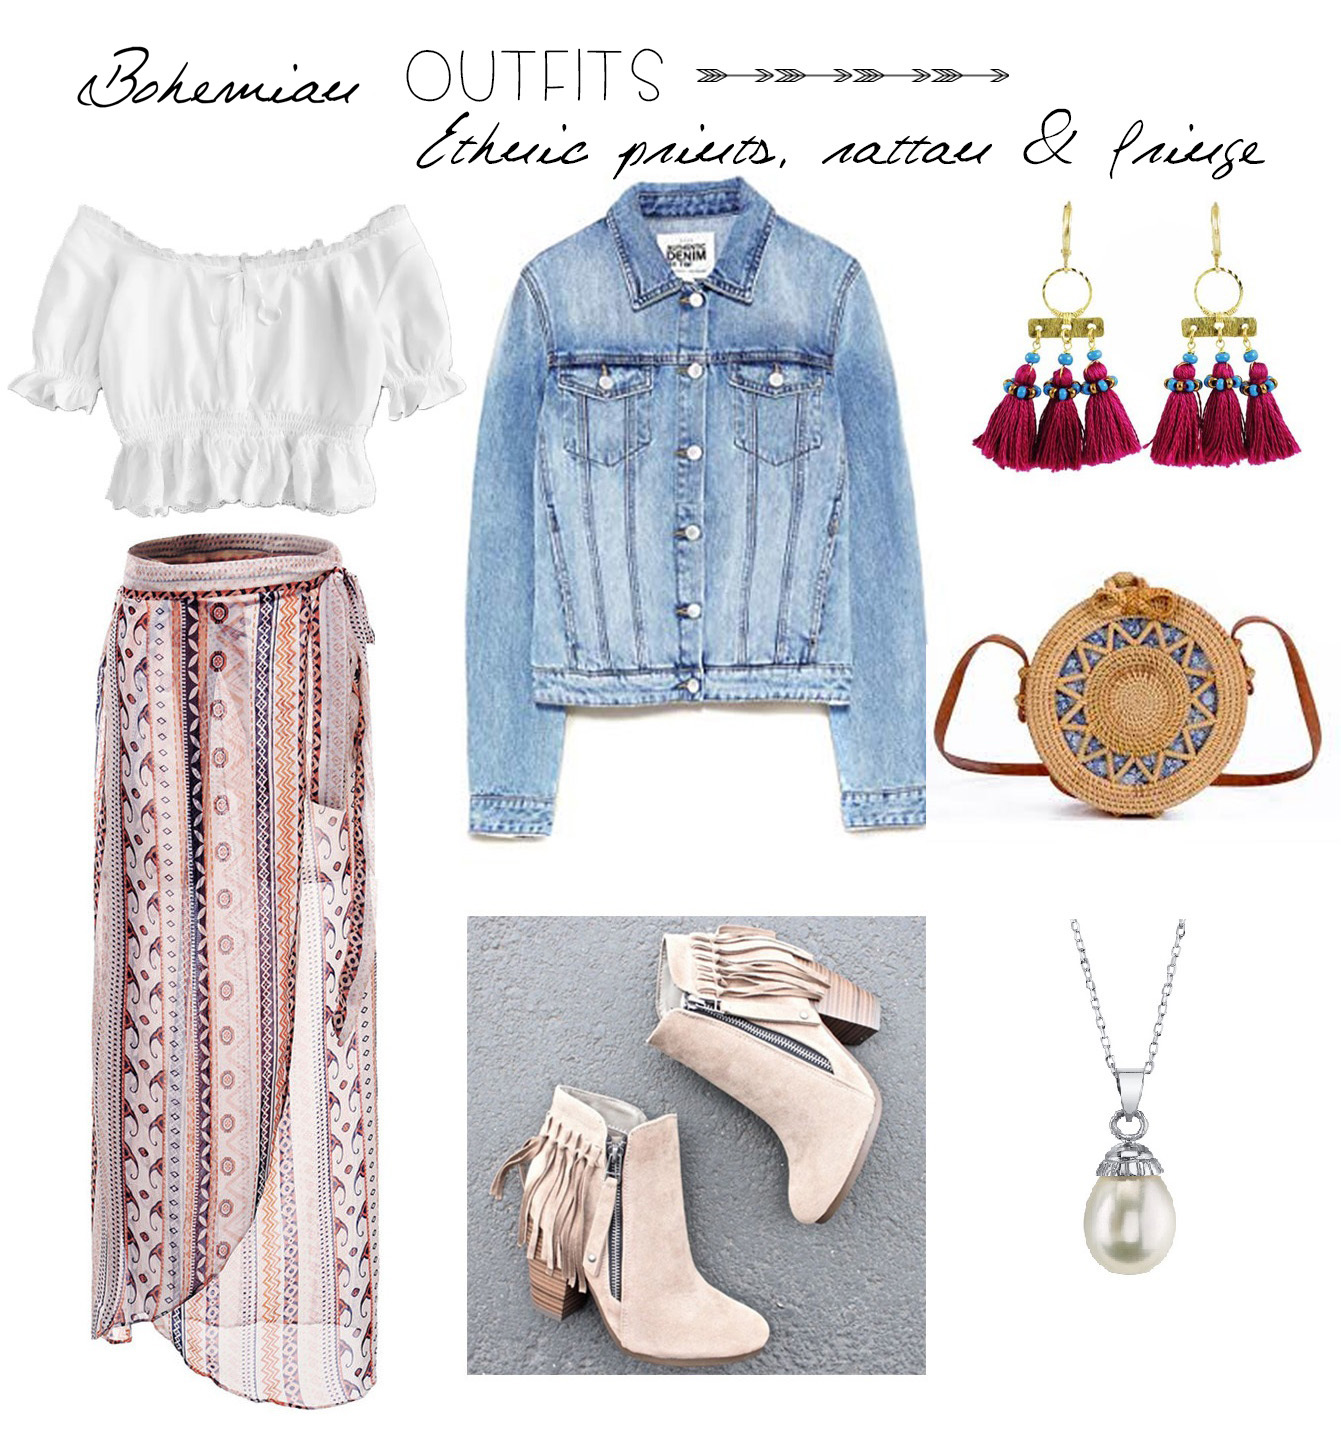 Bohemian Outfit